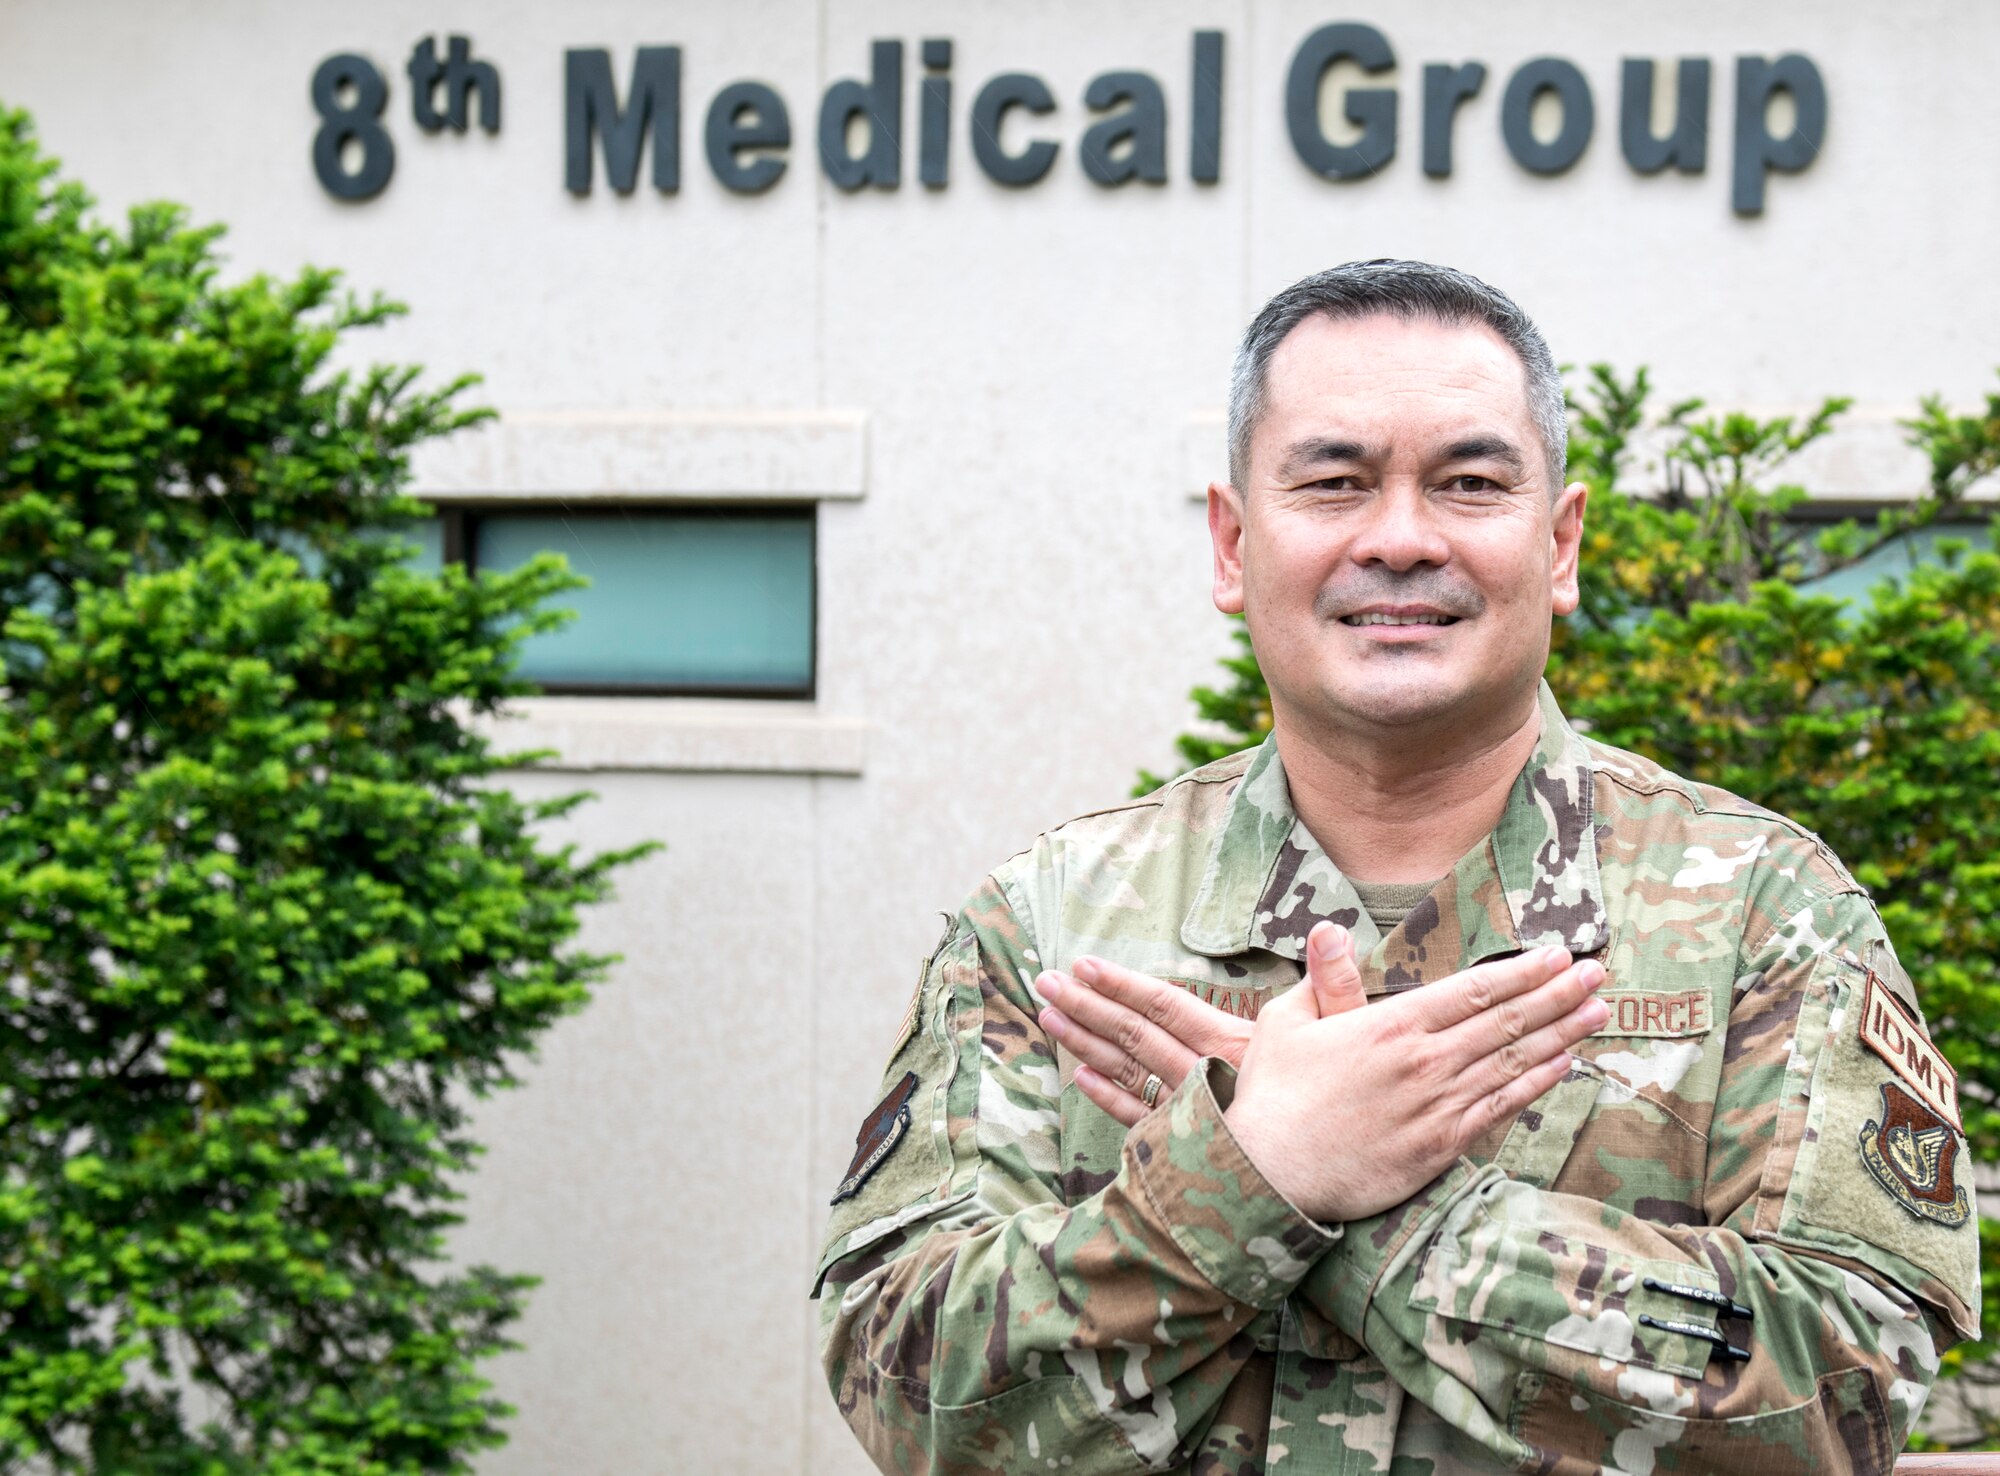 Chief master sergeant Joe Dittman folds his hands like a bird, which is the hawk hand sign, in front of the 8th Medical Group building